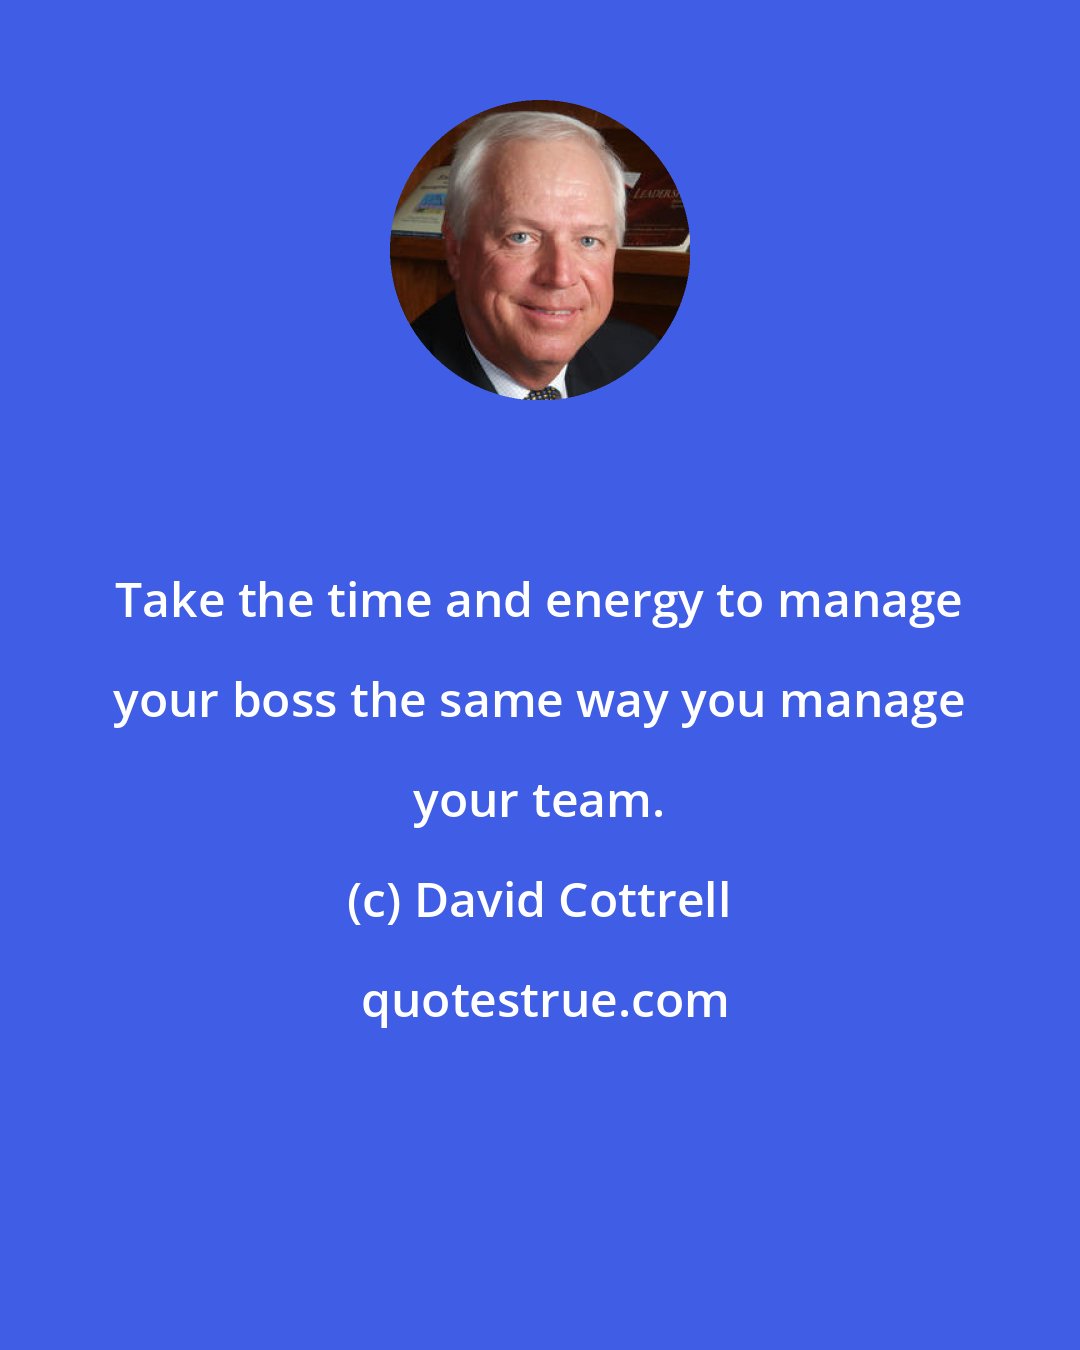 David Cottrell: Take the time and energy to manage your boss the same way you manage your team.